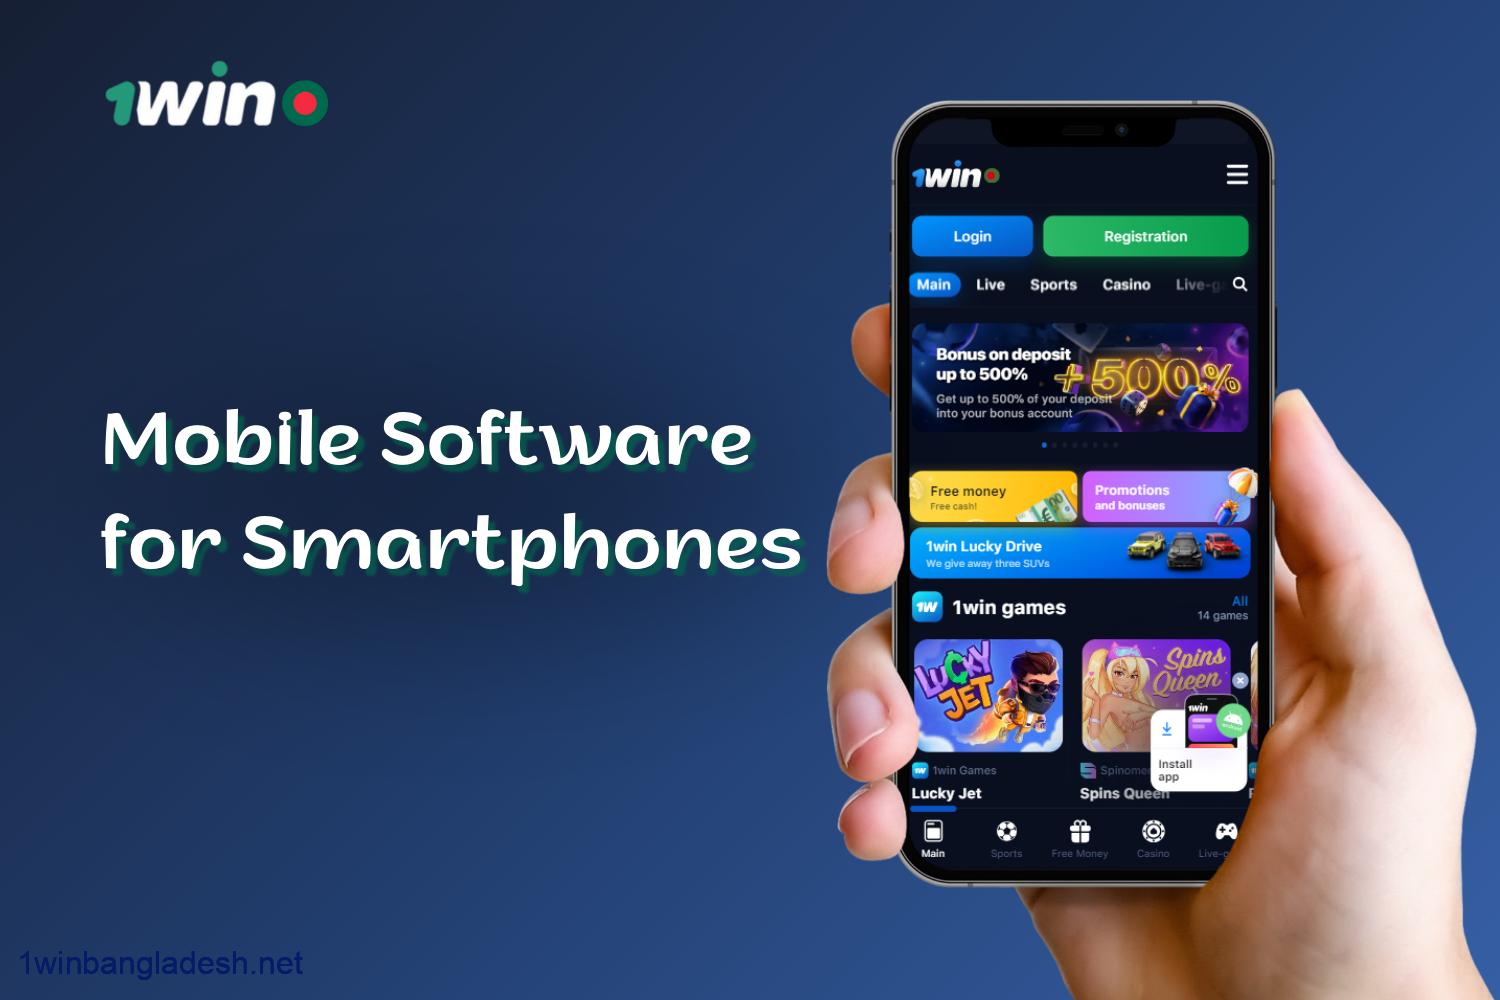 1win has mobile software for smartphones for Bangladeshi users